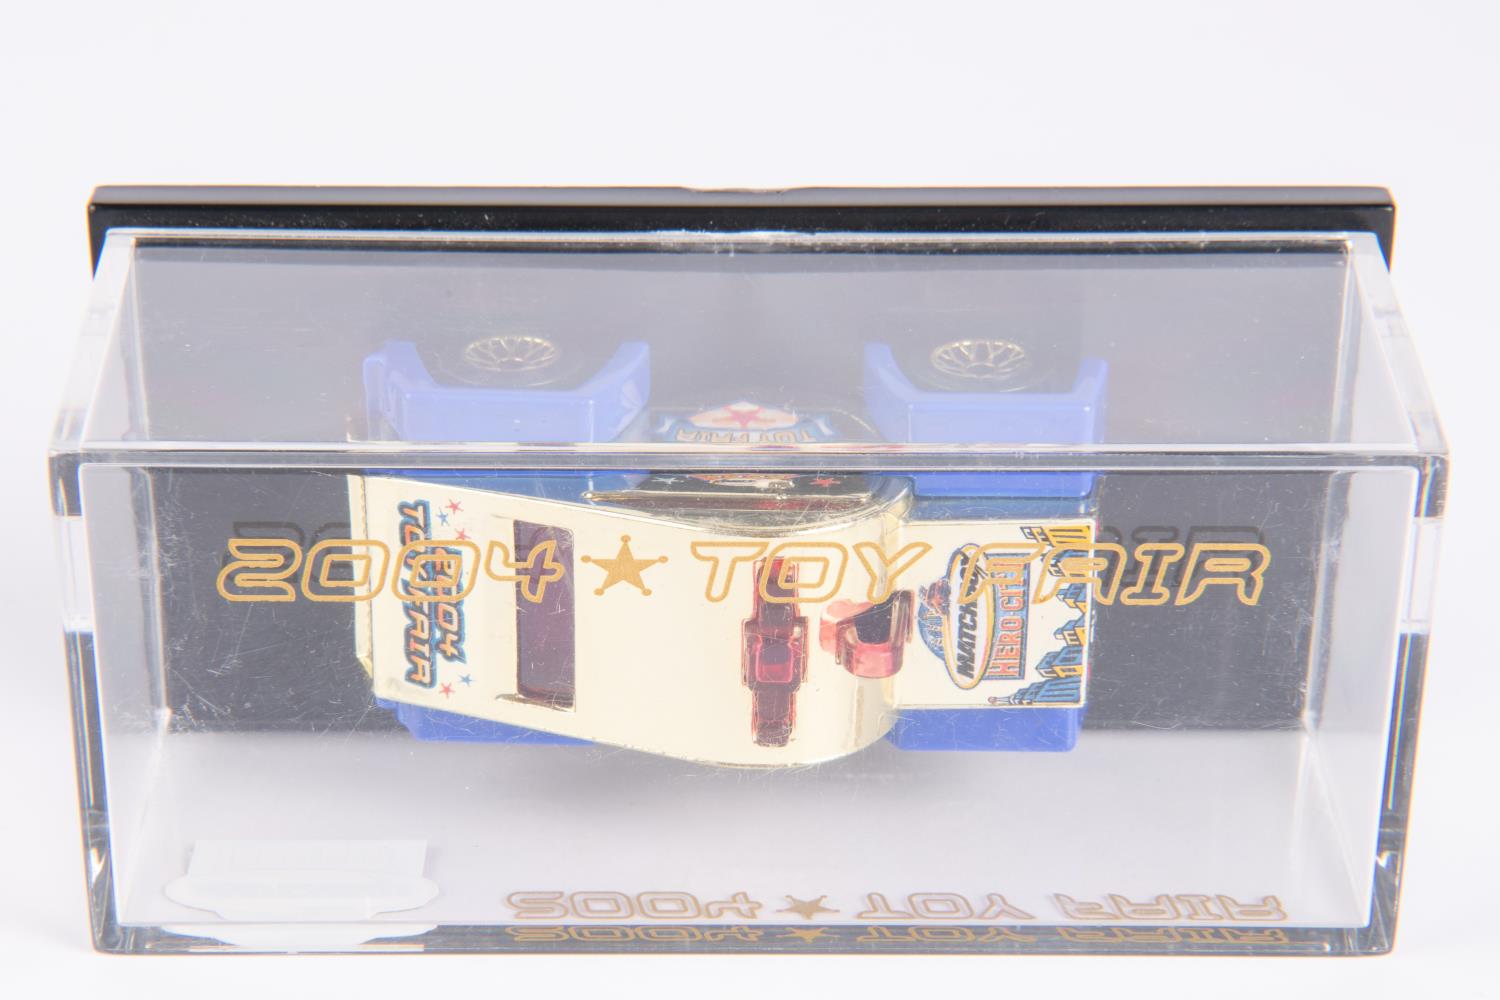 Matchbox Hero city 2004 toy fair special issue. Finished in gold chrome body with blue wheel arches. - Image 4 of 5